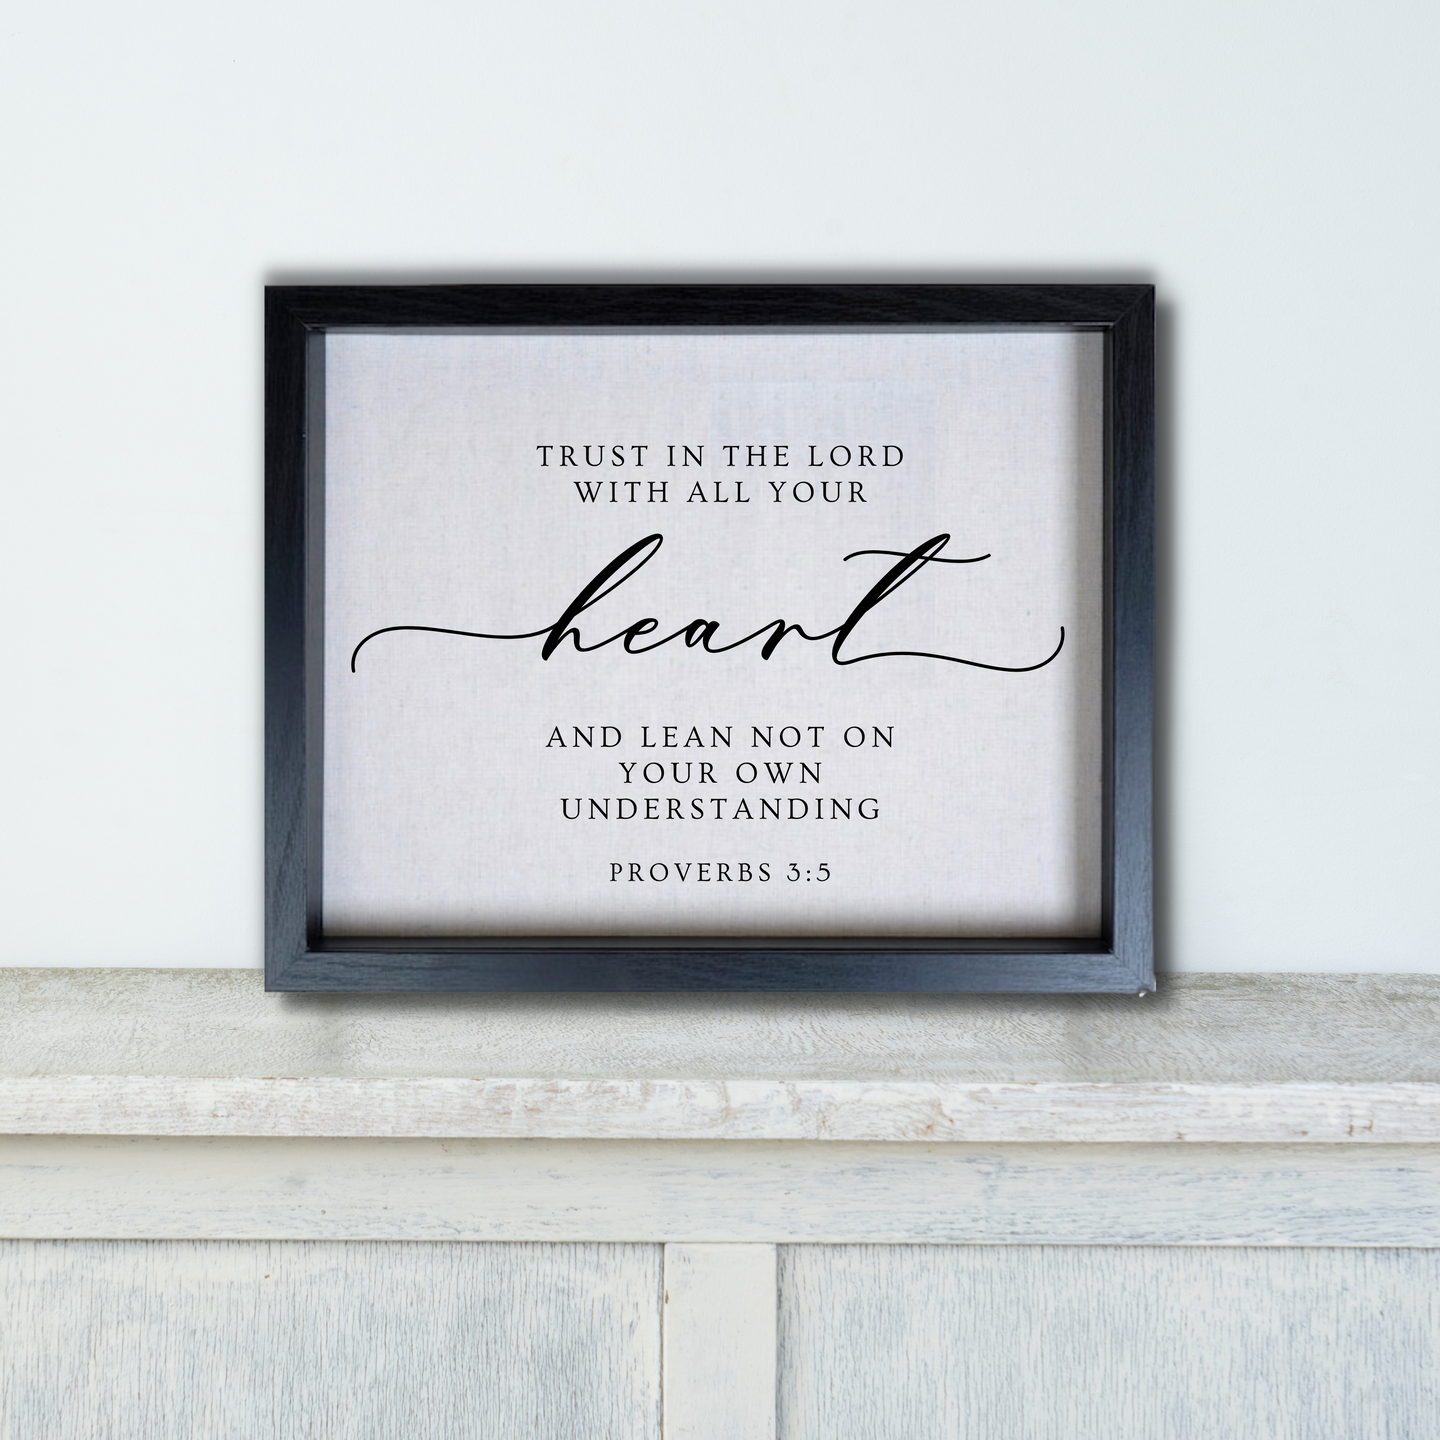 Trust In The LORD With All Your Heart - Proverbs 3:5  Hanging or Sitting Artwork